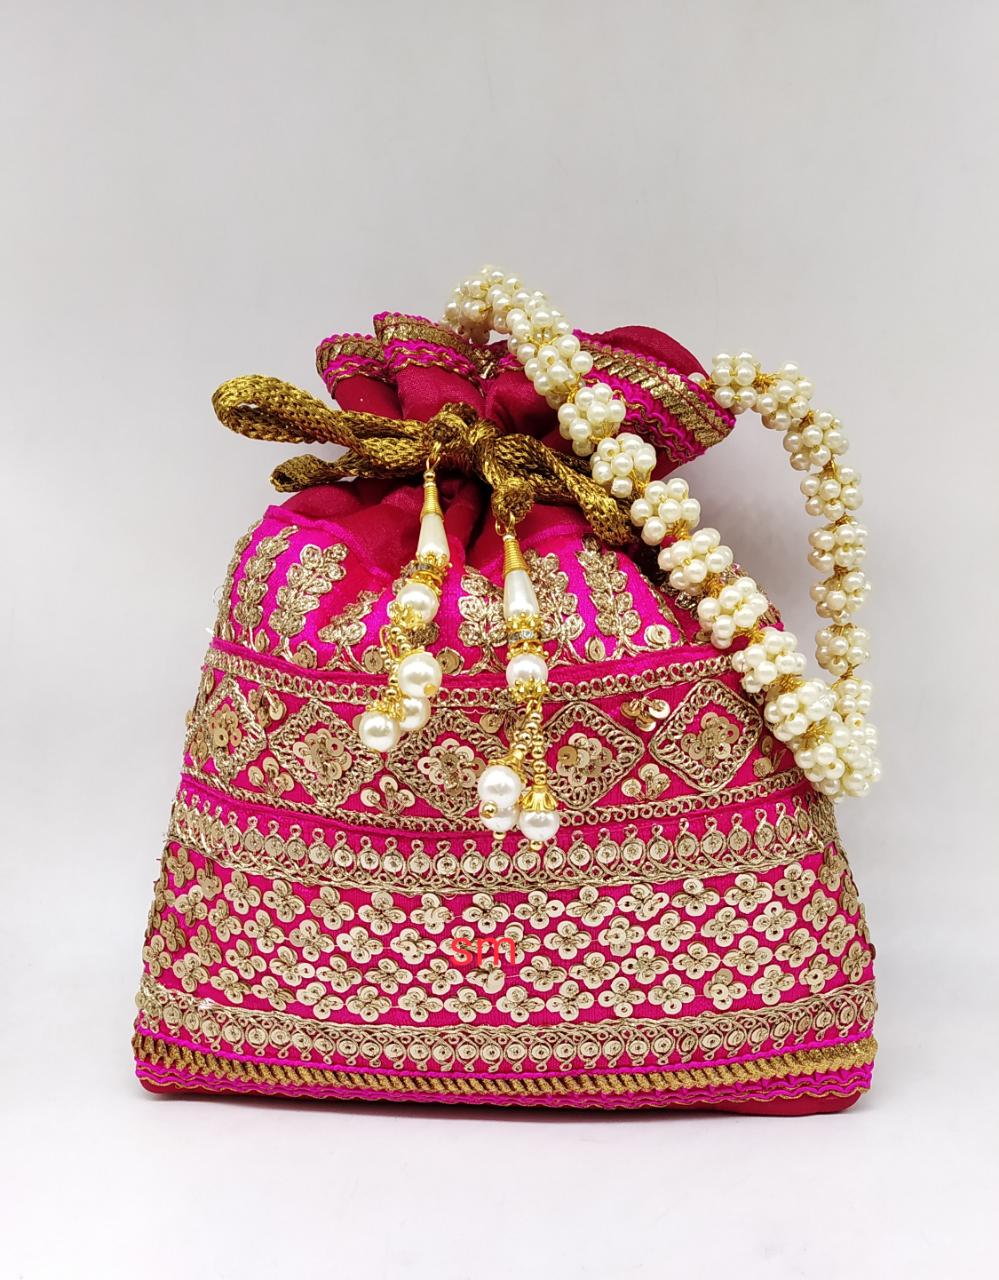 Formal Bead Bag - Hand Bags - Sefabeads Accessories | Handcrafted Goods |  New York